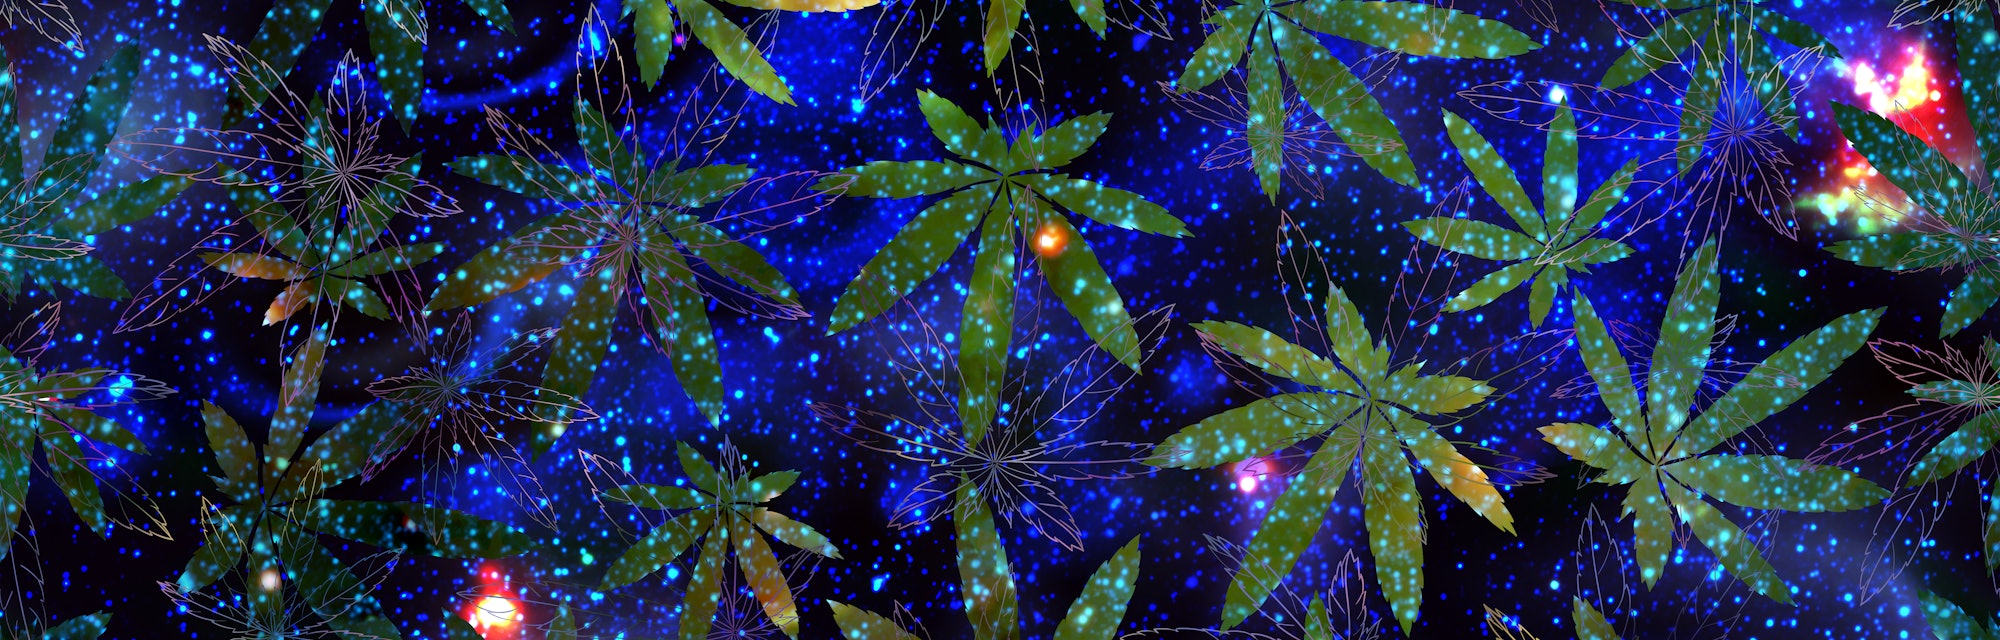 cannabis leaves over a space background